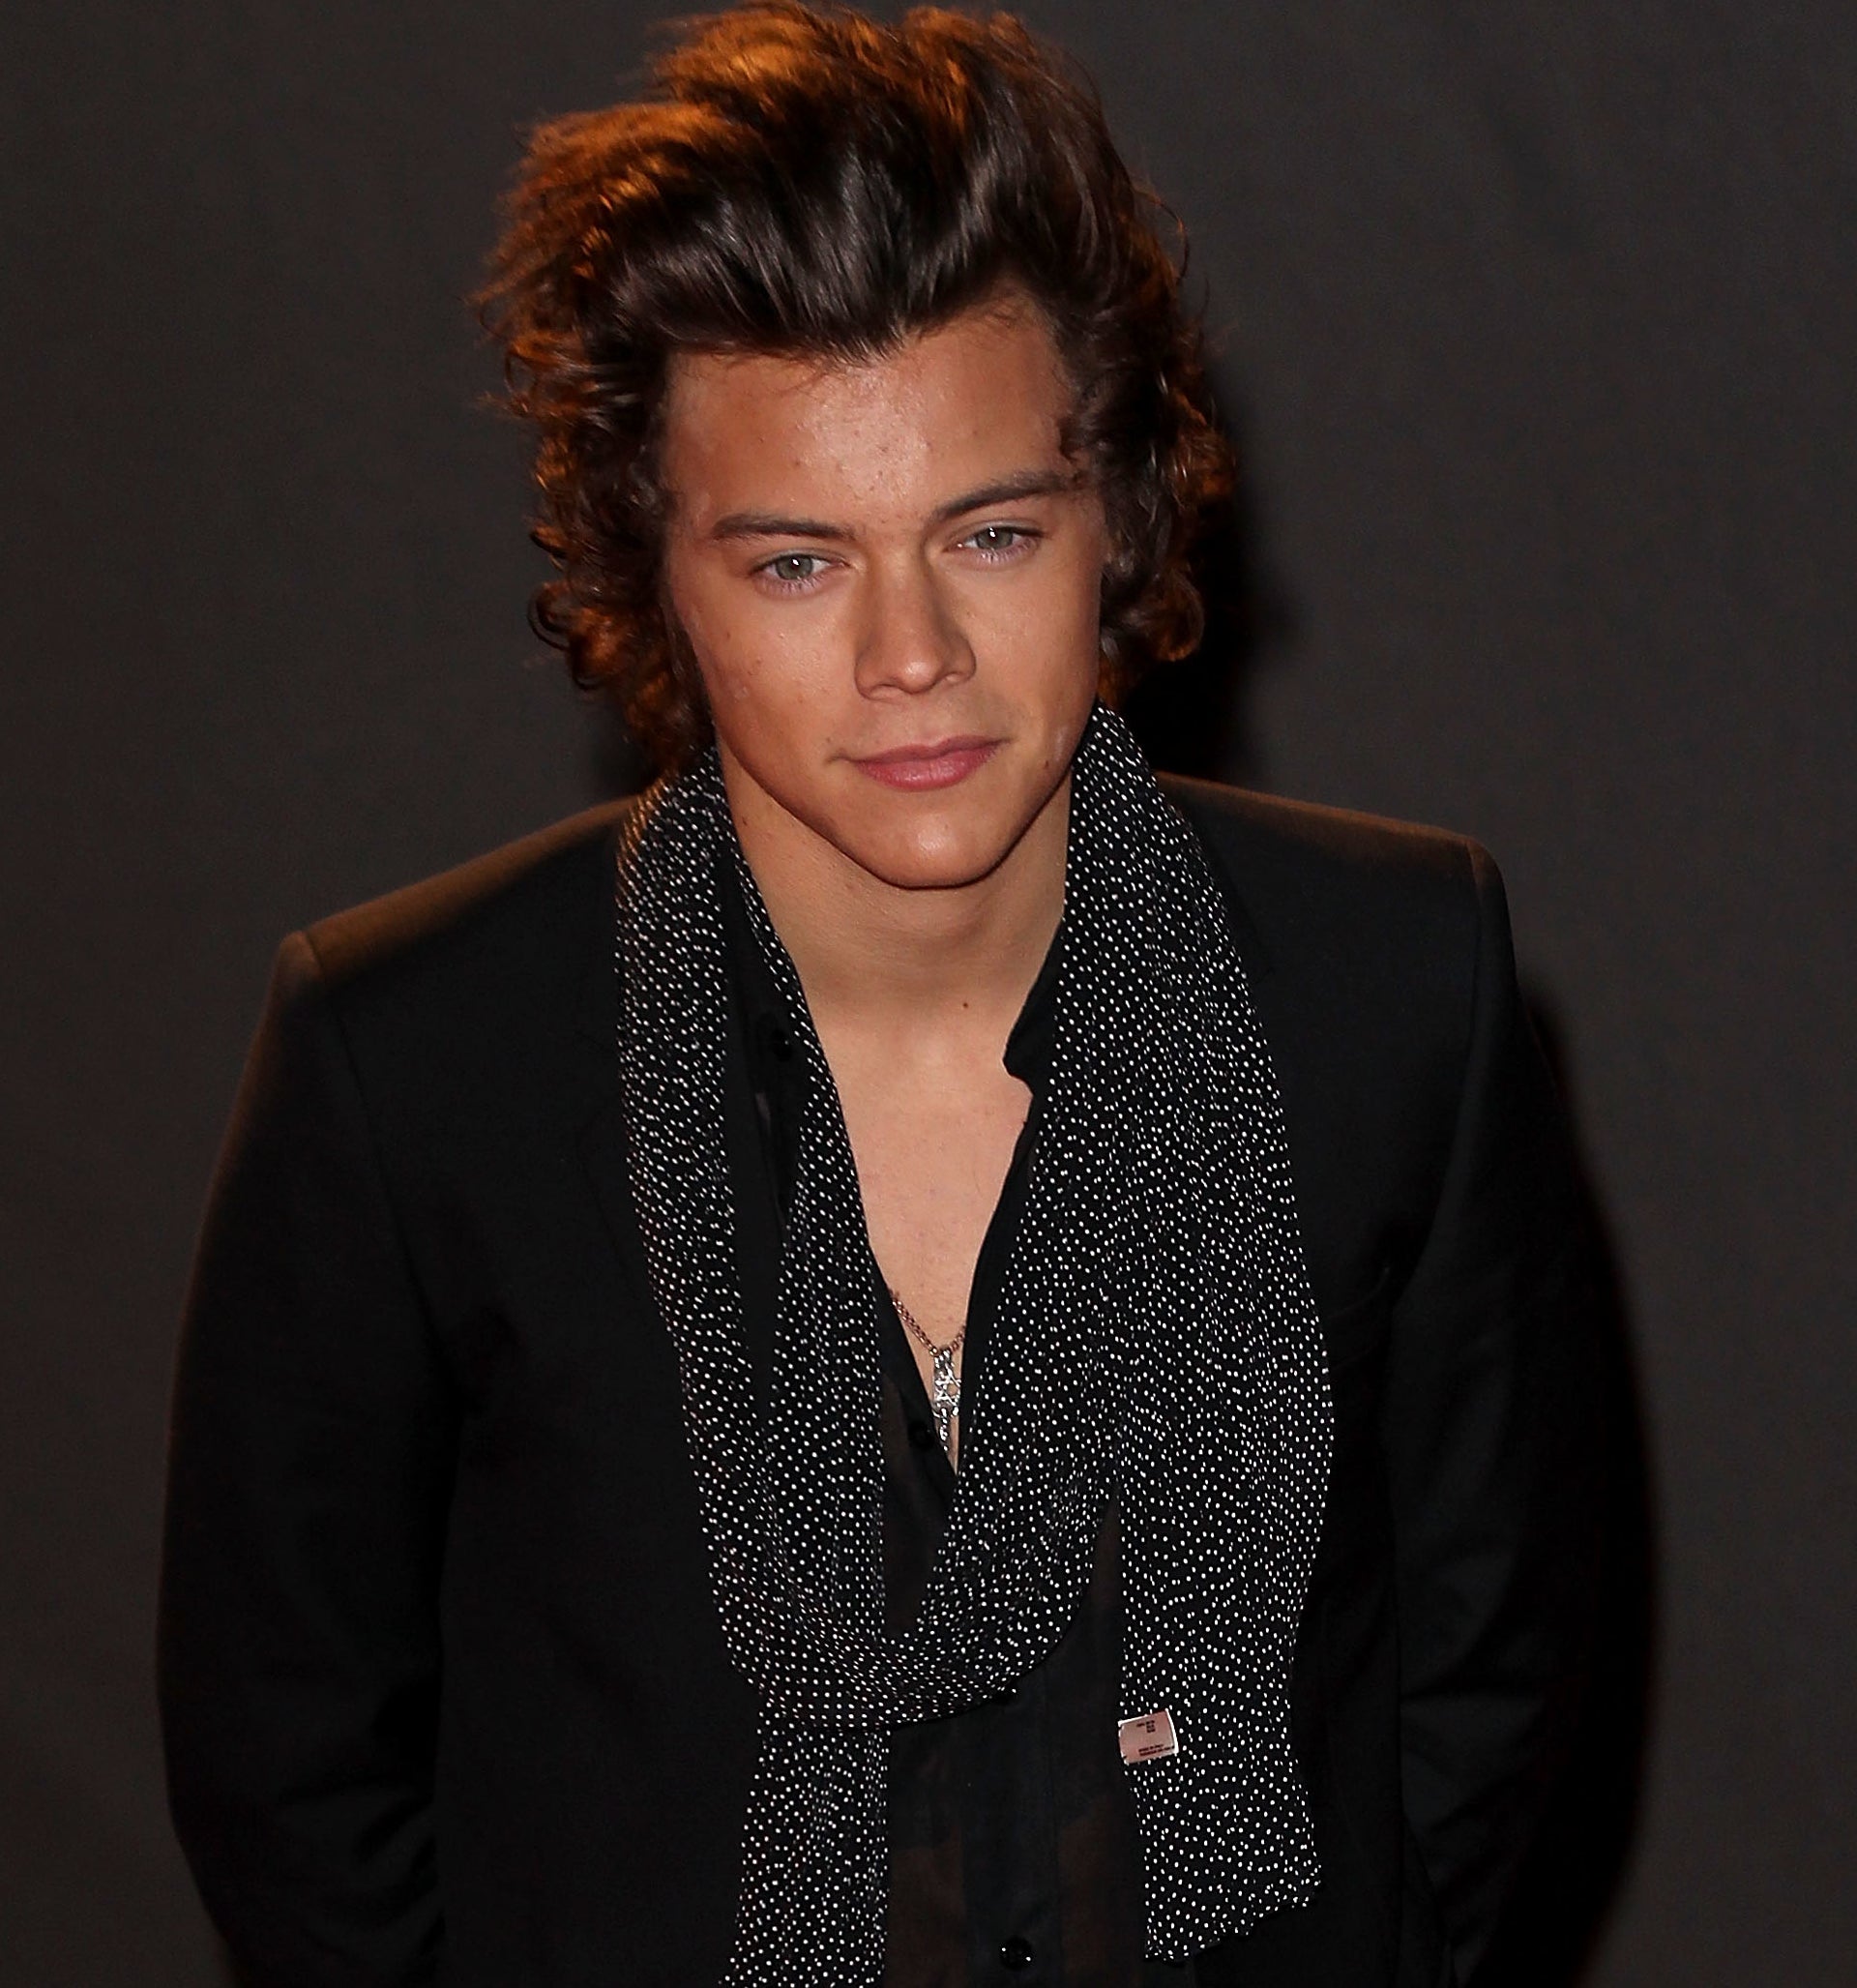 Close-up of Harry wearing a jacket and loose scarf